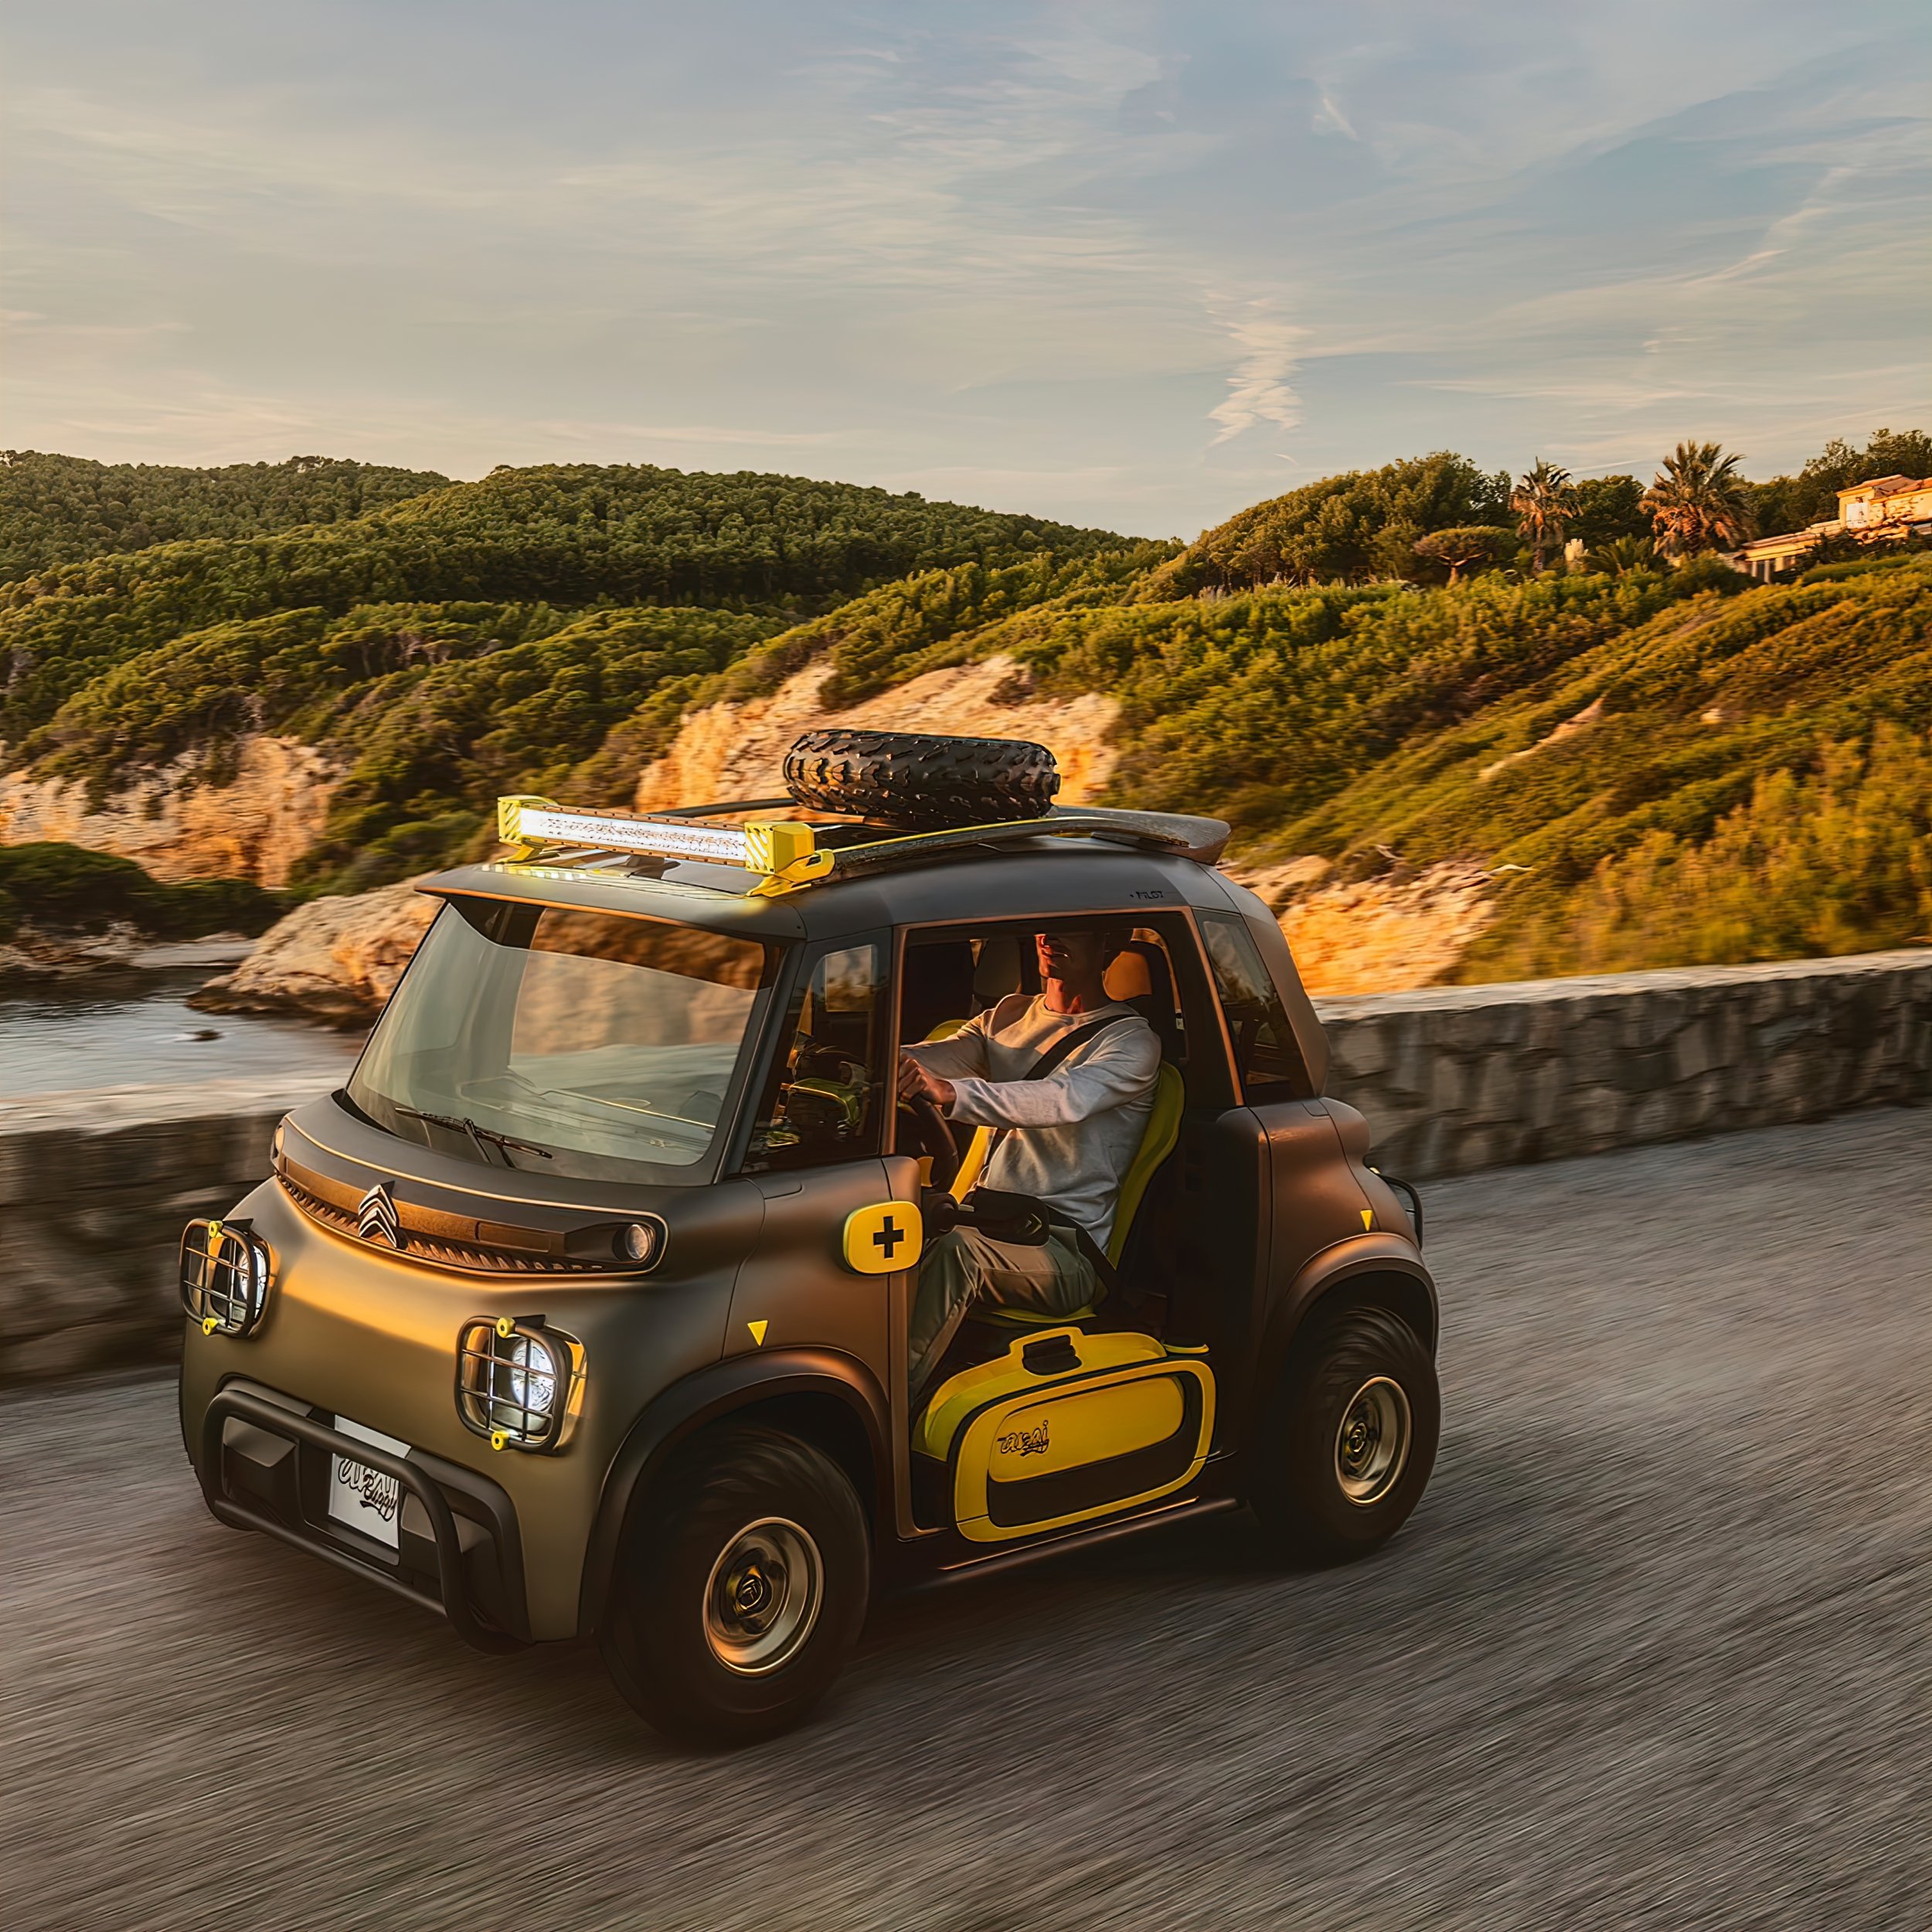  Because of its small stature, it's not actually considered a car in the European Union. It is viewed as a quadricycle.&nbsp;&nbsp;  This means that a license is not required to drive it, and people as young as fourteen in some countries are allowed 